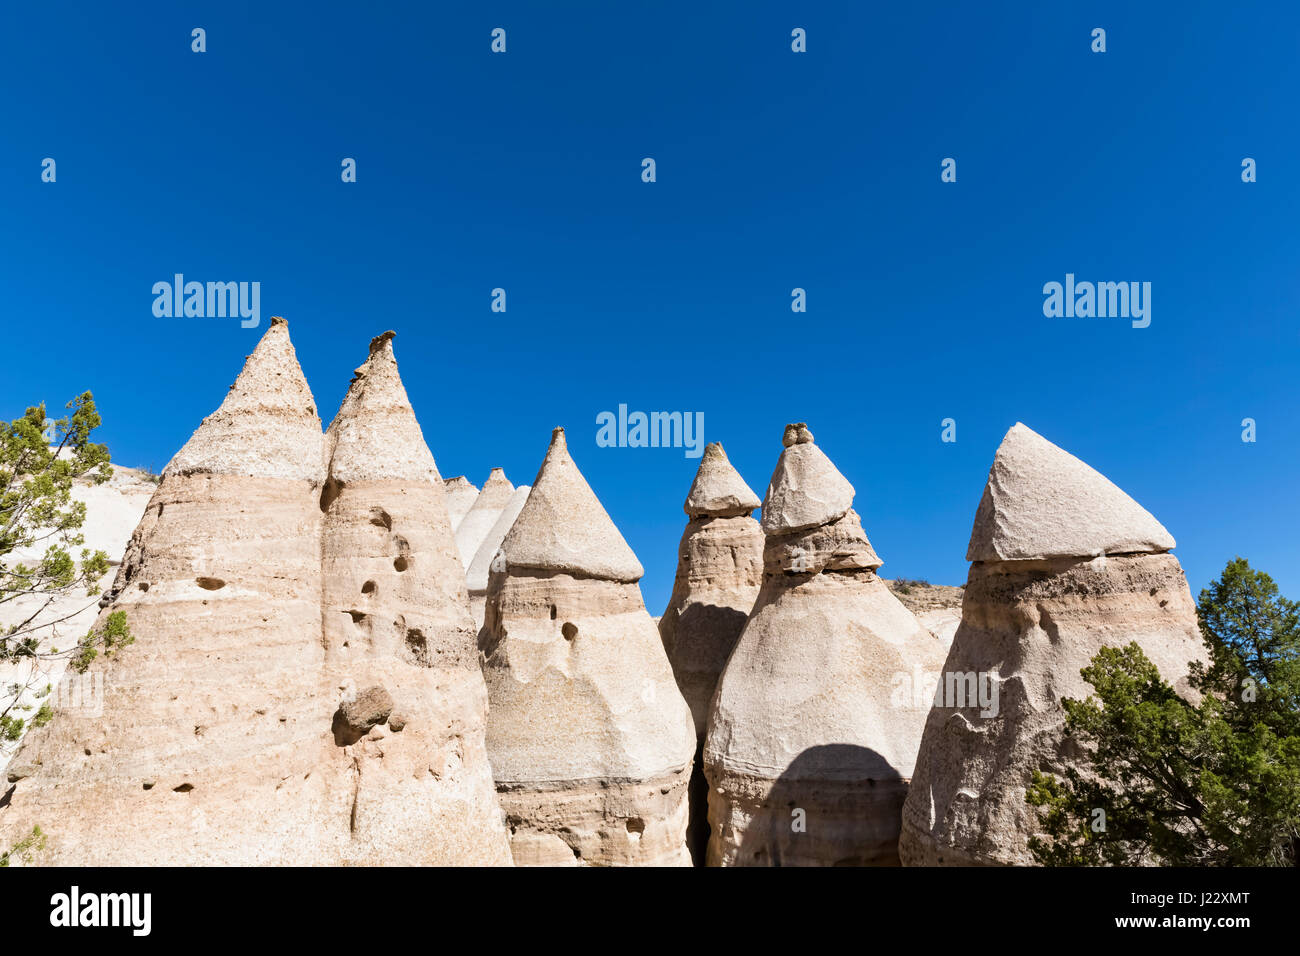 USA, New Mexico, Pajarito Plateau, Sandoval County, Kasha-Katuwe Tent Rocks National Monument, desert valley with bizarre rock formations Stock Photo